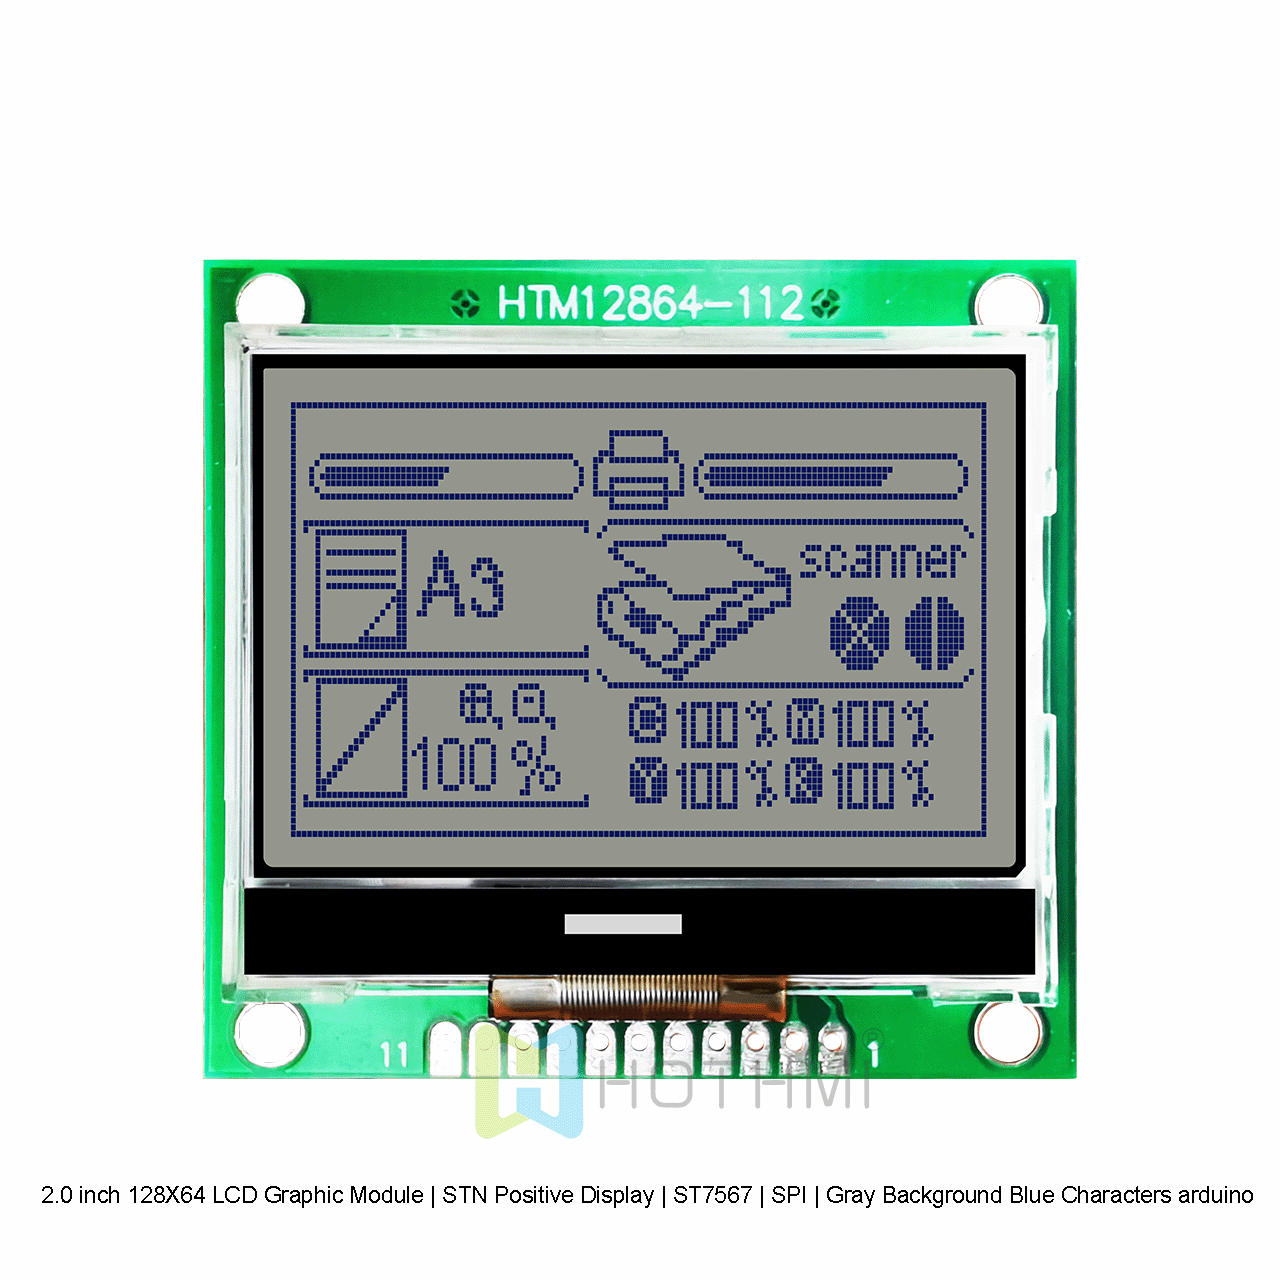 2.0 inch 128X64 LCD Graphic Module | STN Positive Display | ST7567 | SPI | Gray Background Blue Characters arduino